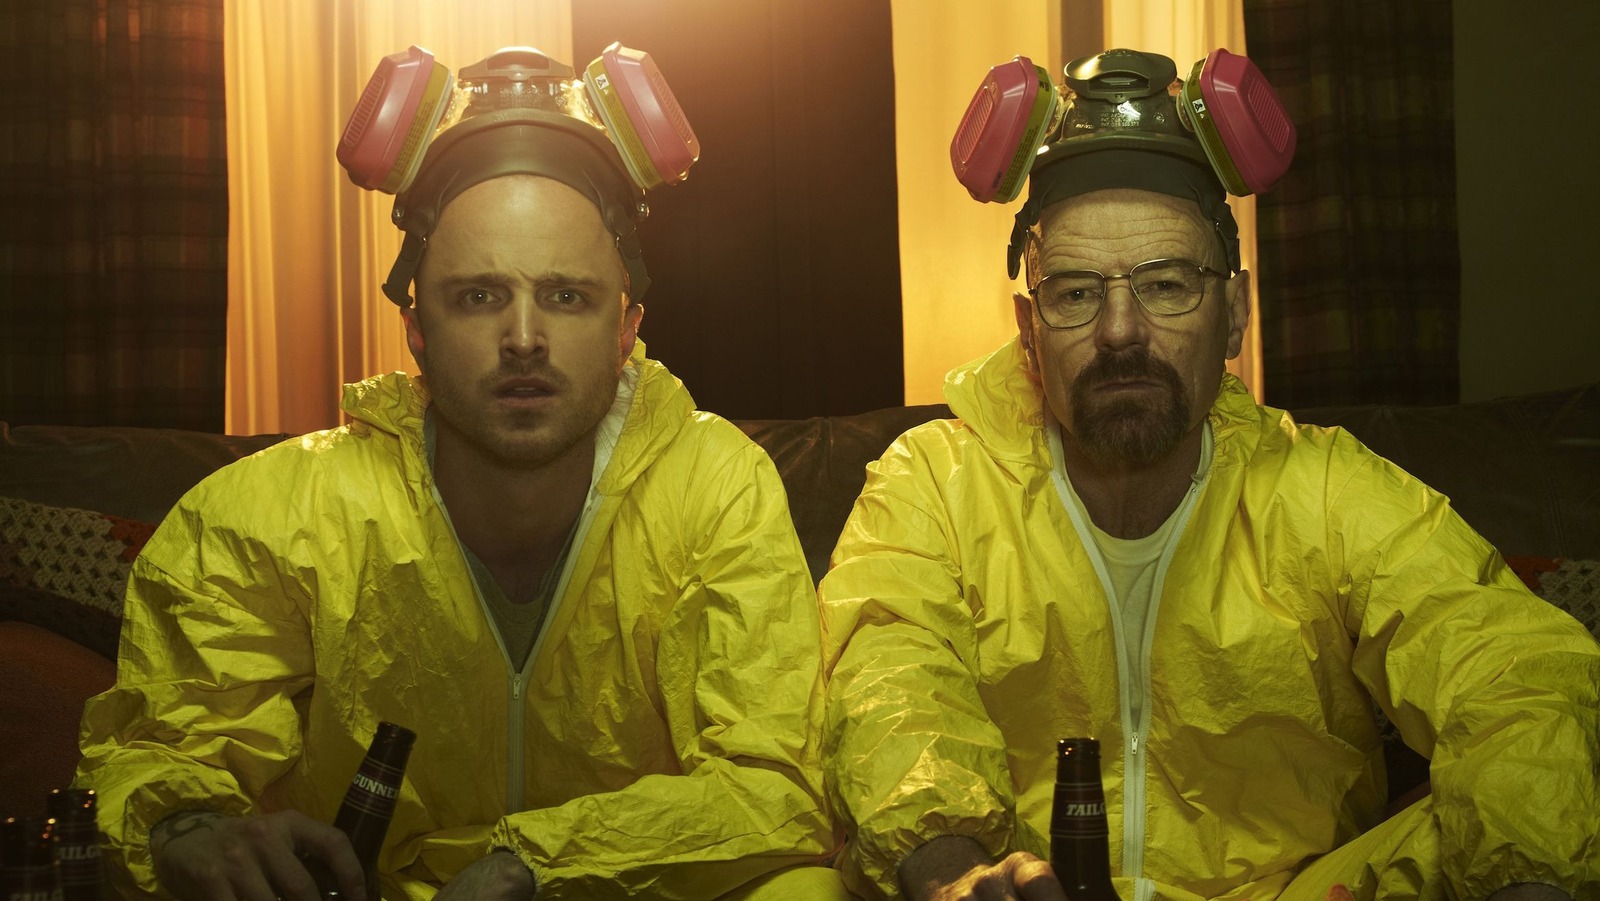 #Walter White And Jesse Pinkman Will Appear In Better Call Saul Season 6